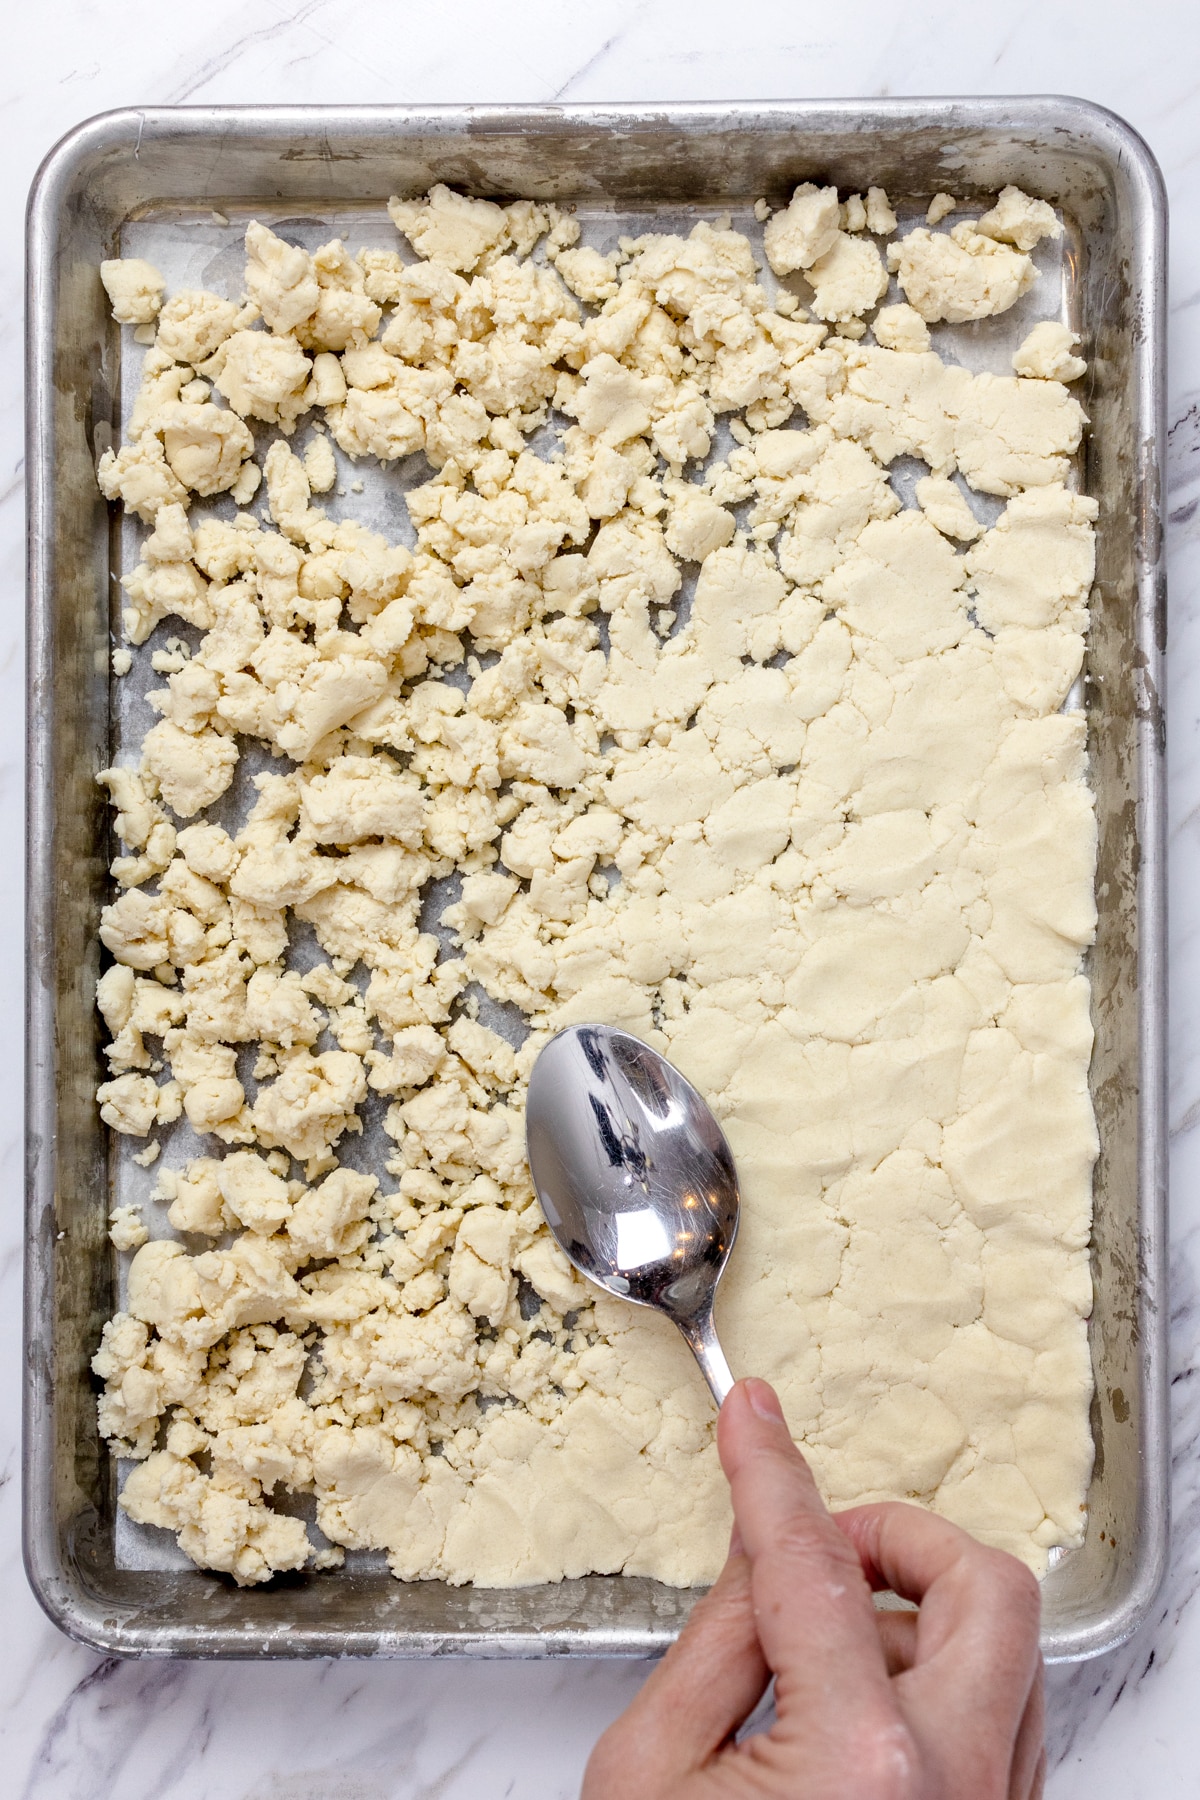 Top view of cookie dough being pressed down into the bottom of a baking sheet.